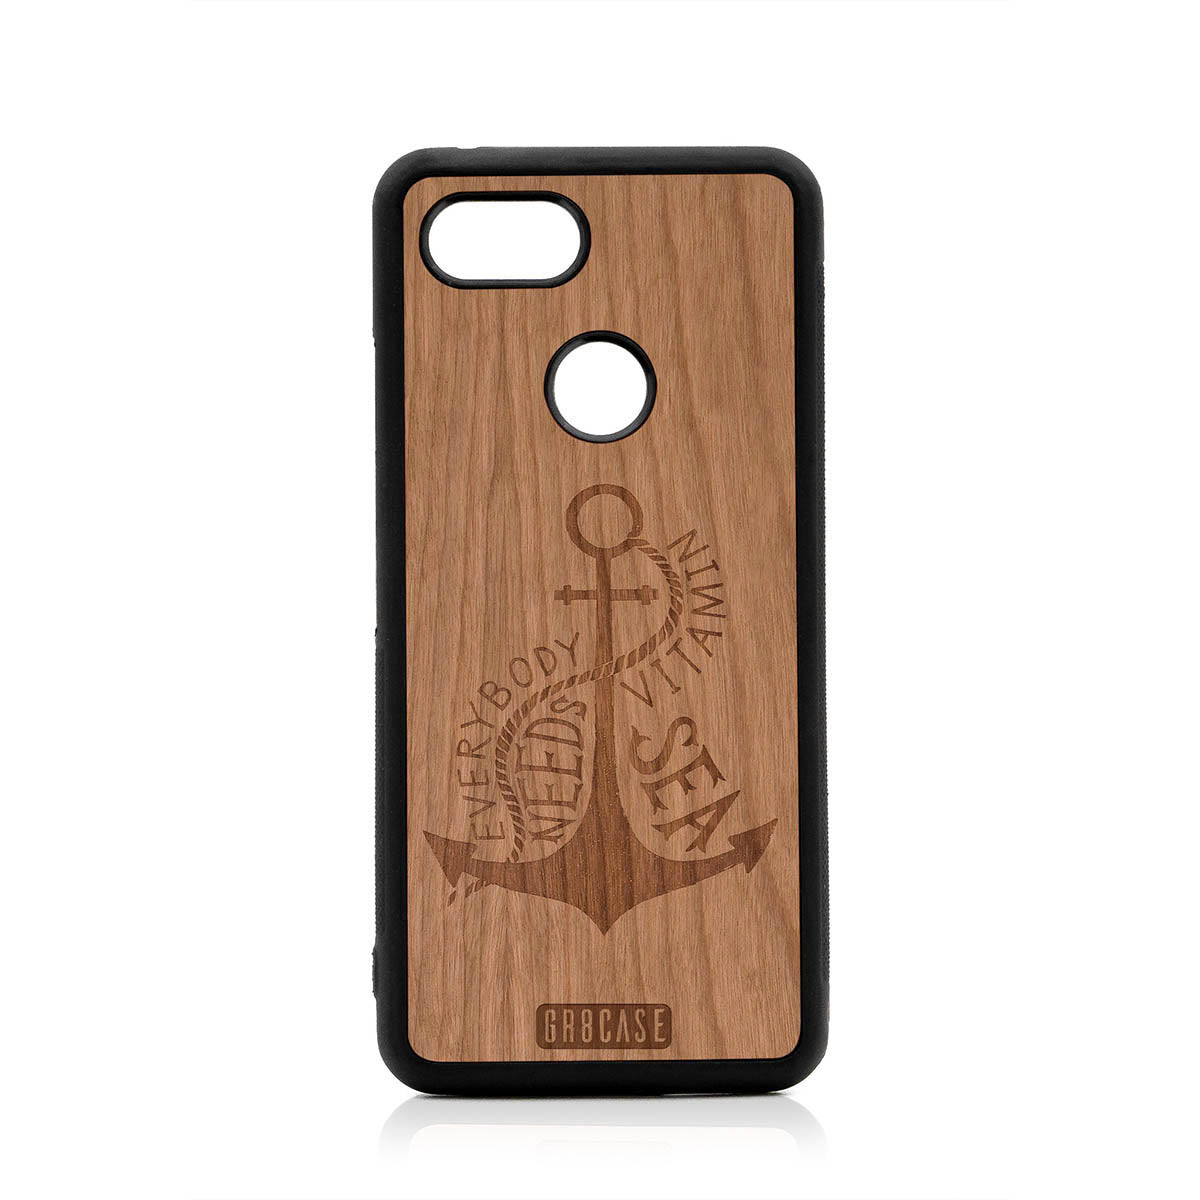 Everybody Needs Vitamin Sea (Anchor) Design Wood Case For Google Pixel 3 by GR8CASE